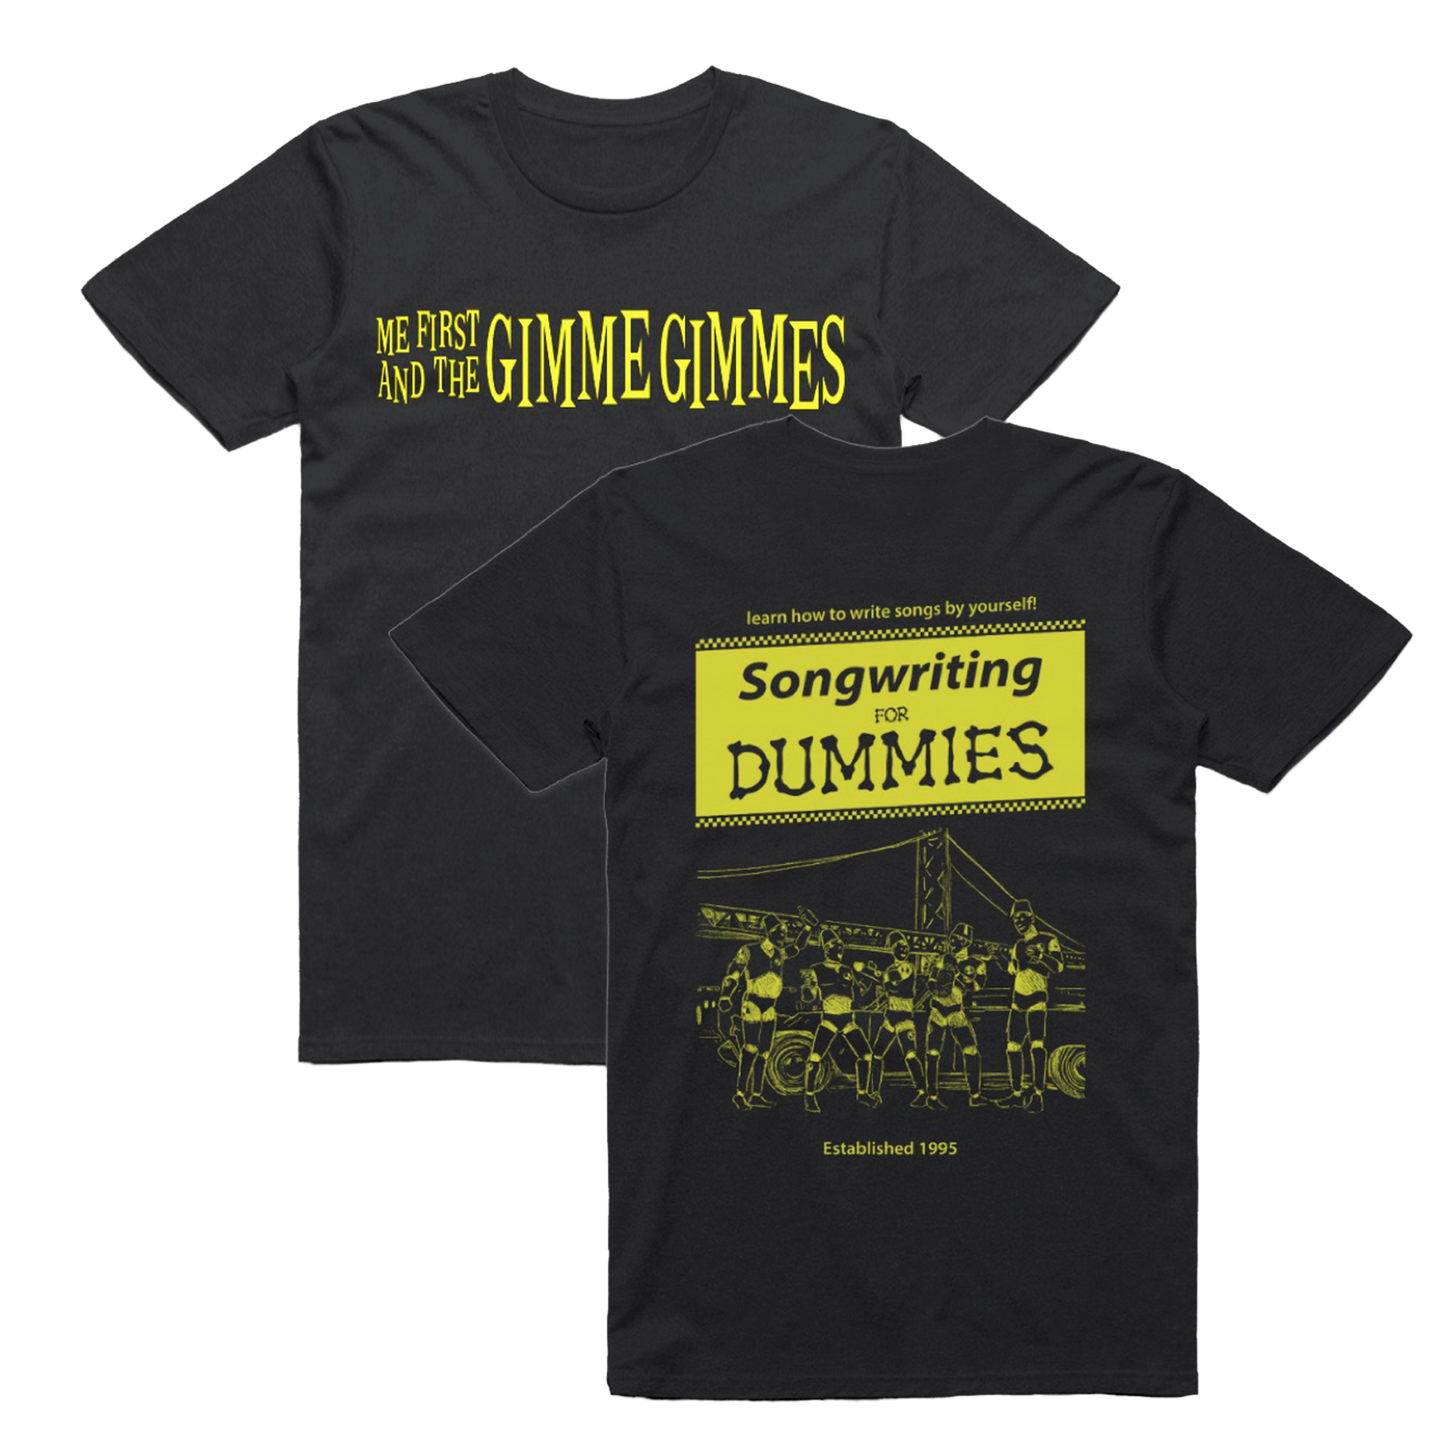 Songwriting for Dummies T-Shirt